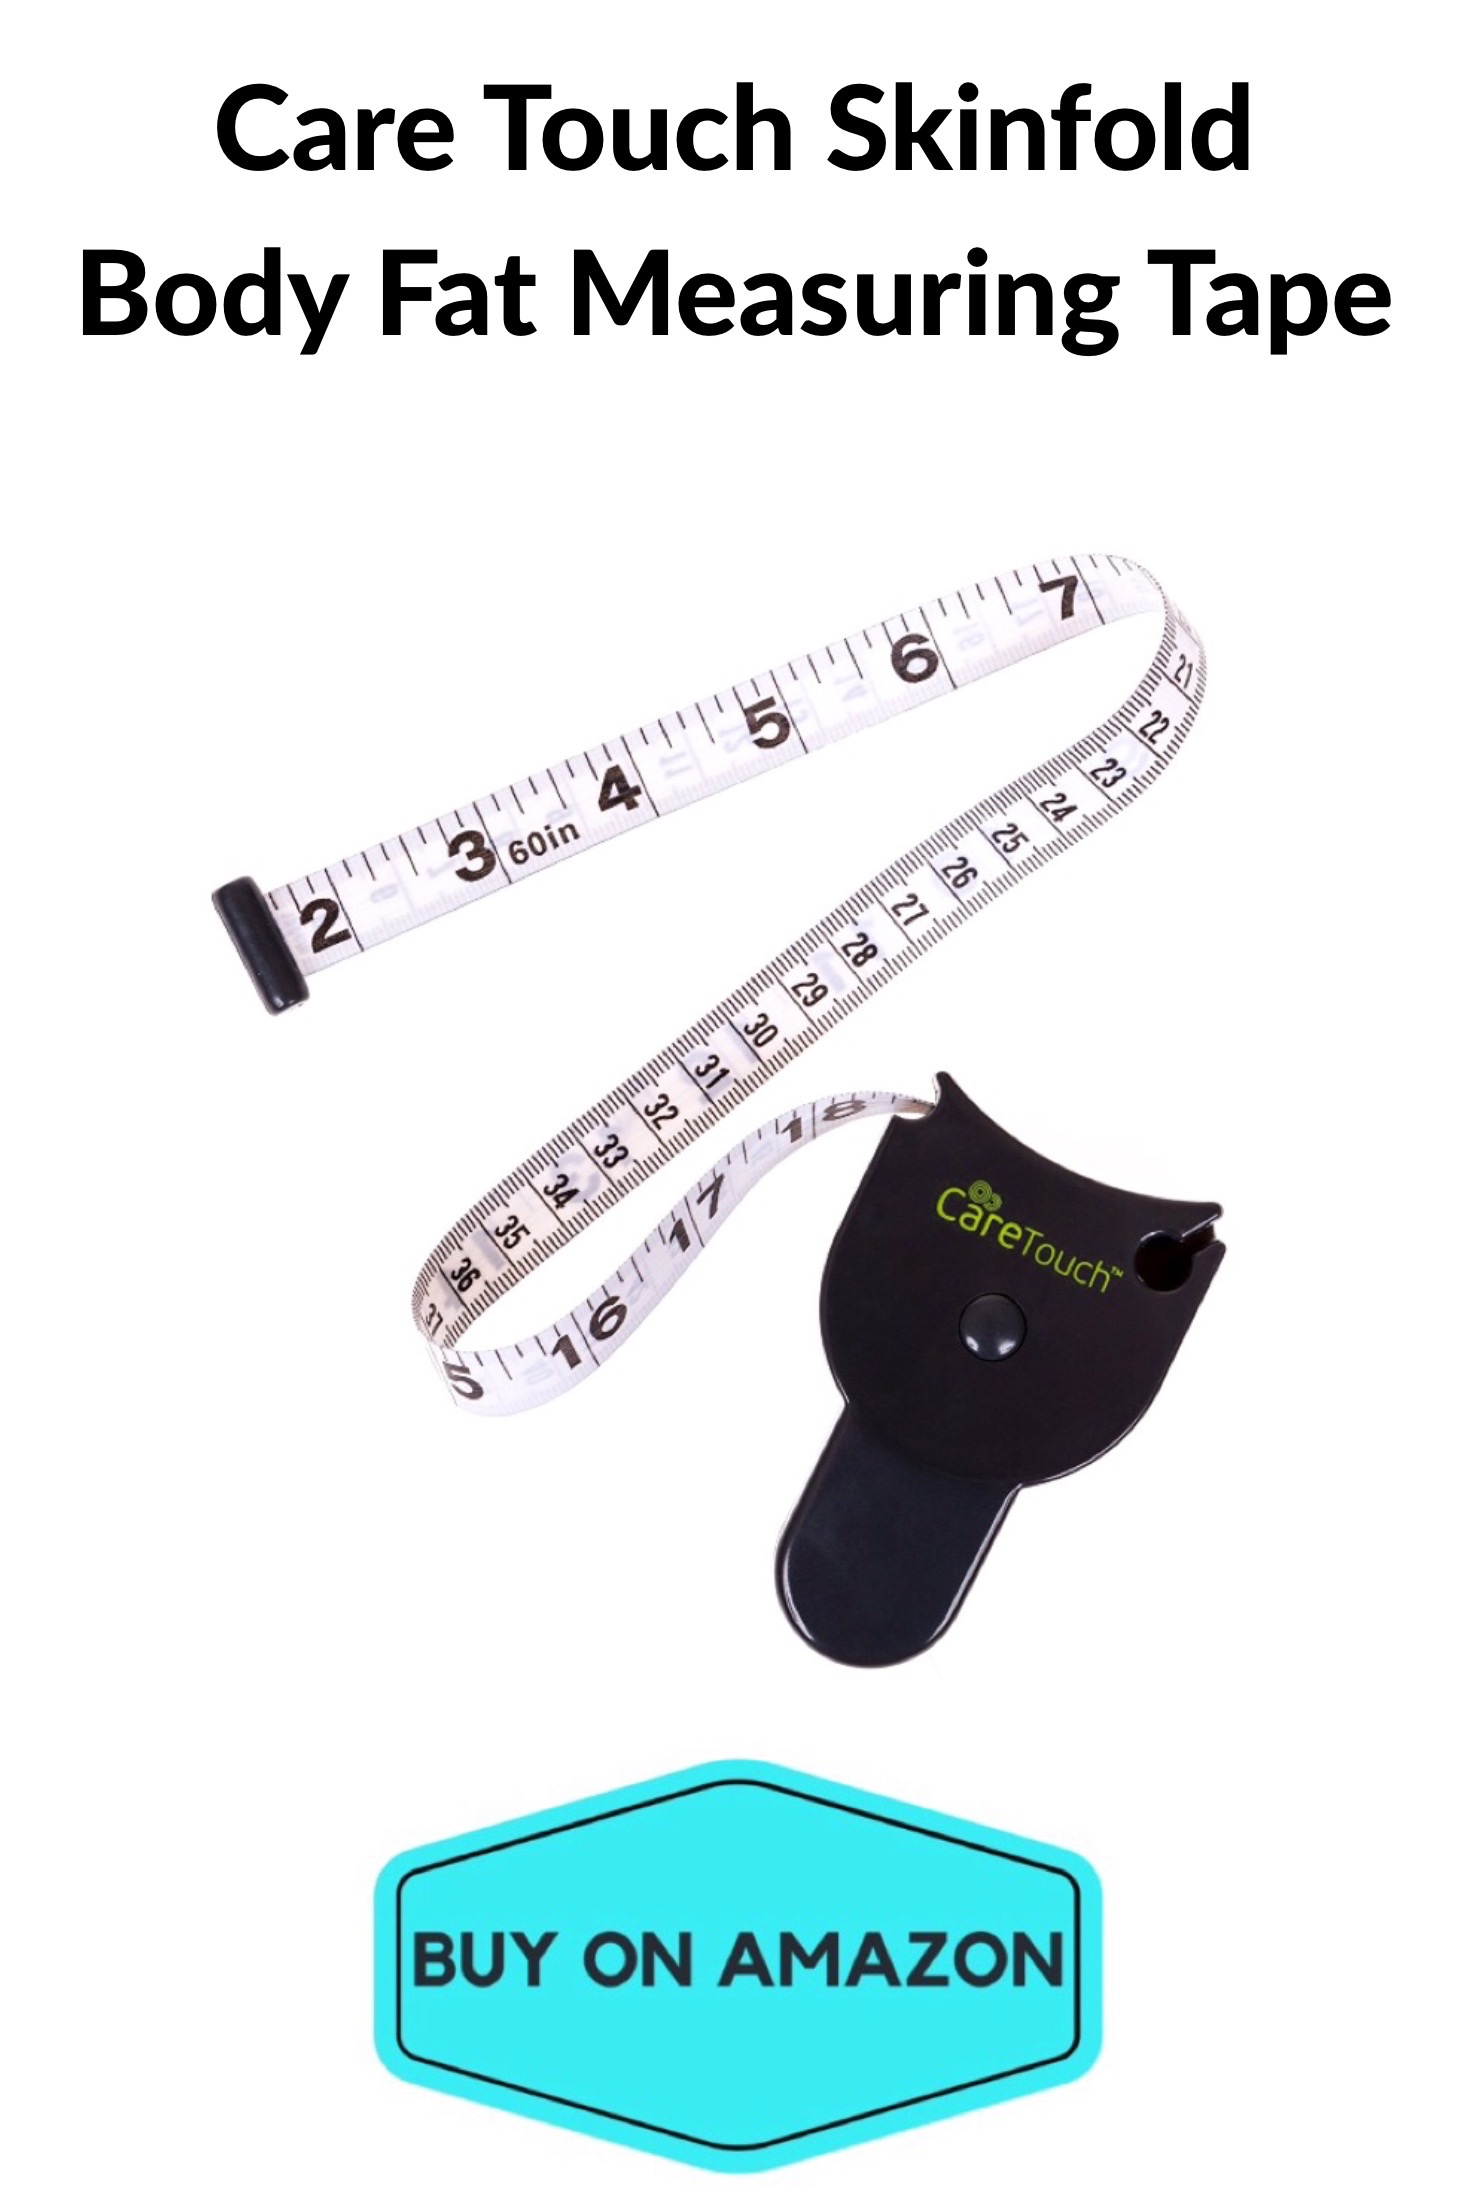 Care Touch Skinfold Body Fat Measuring Tape